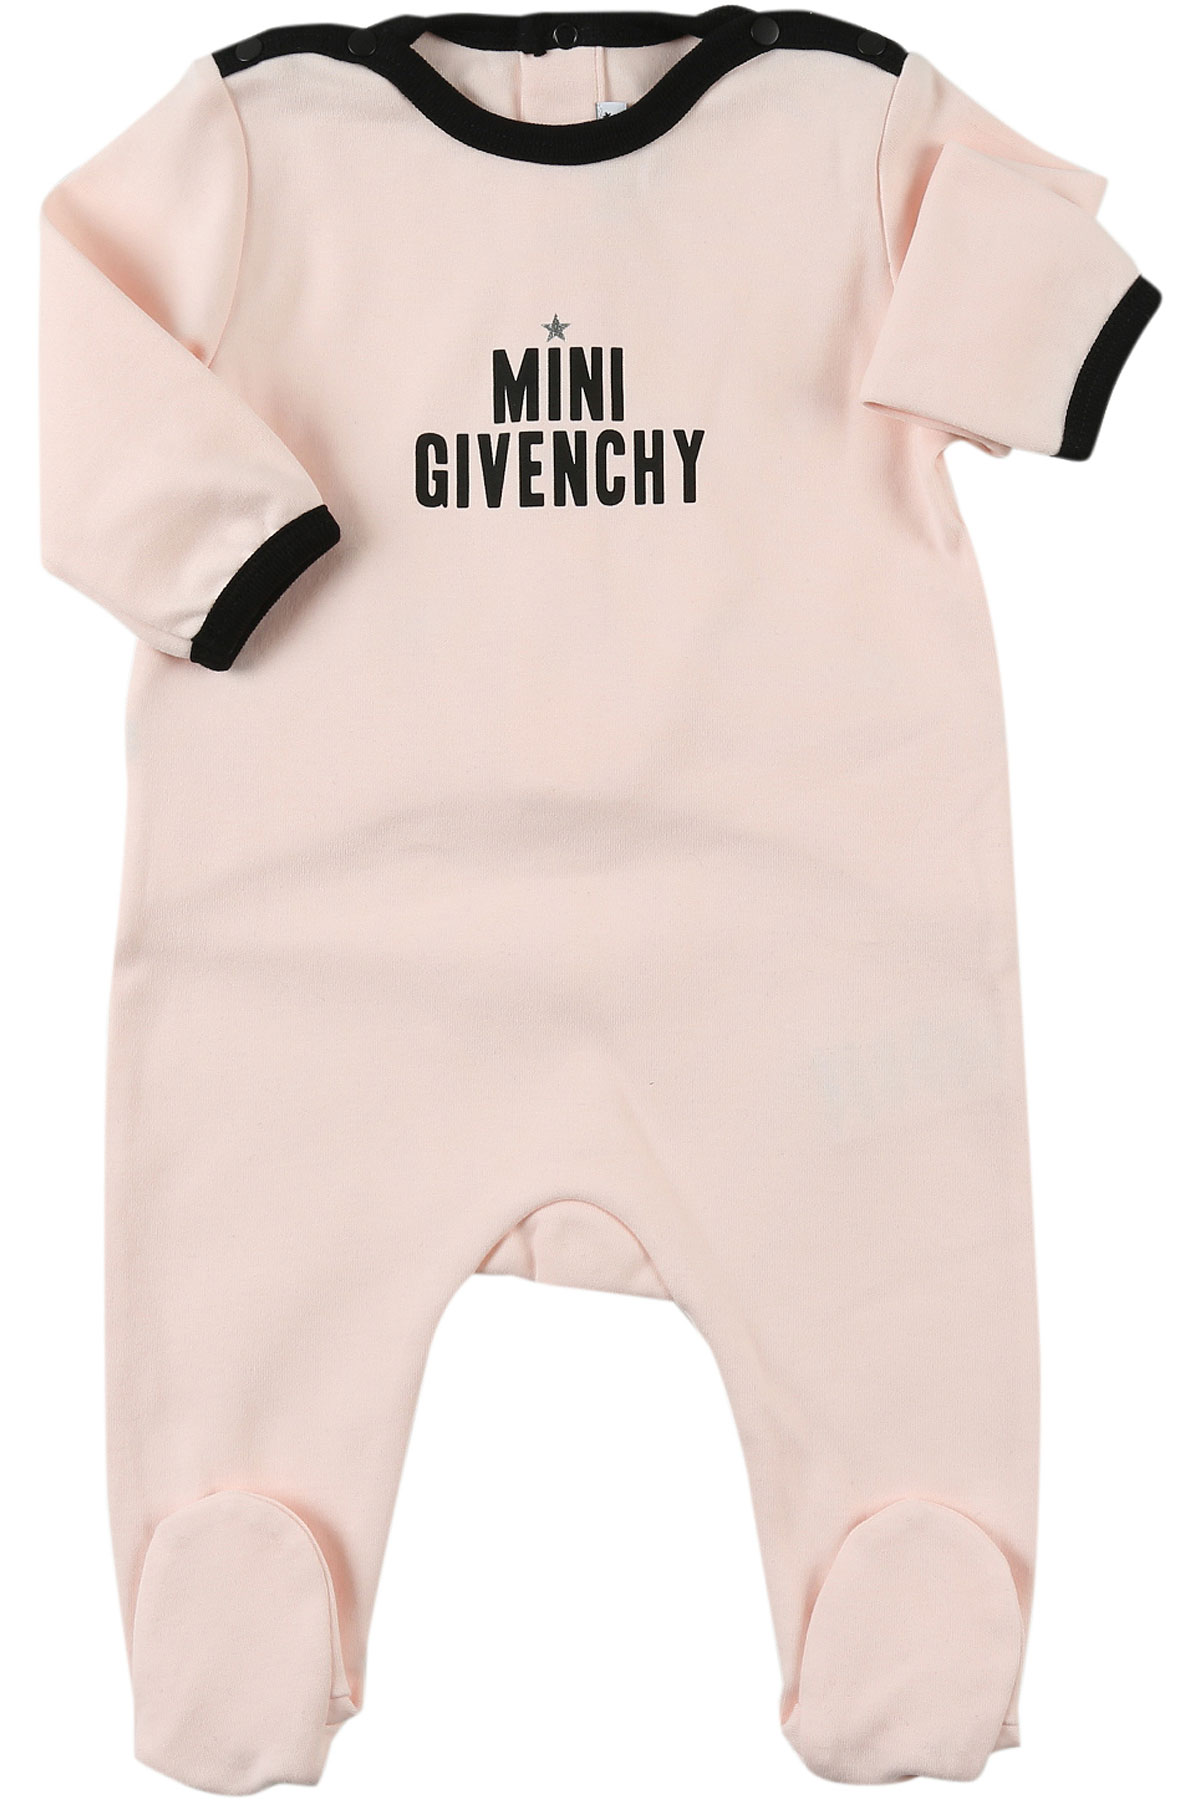 givenchy infant clothes